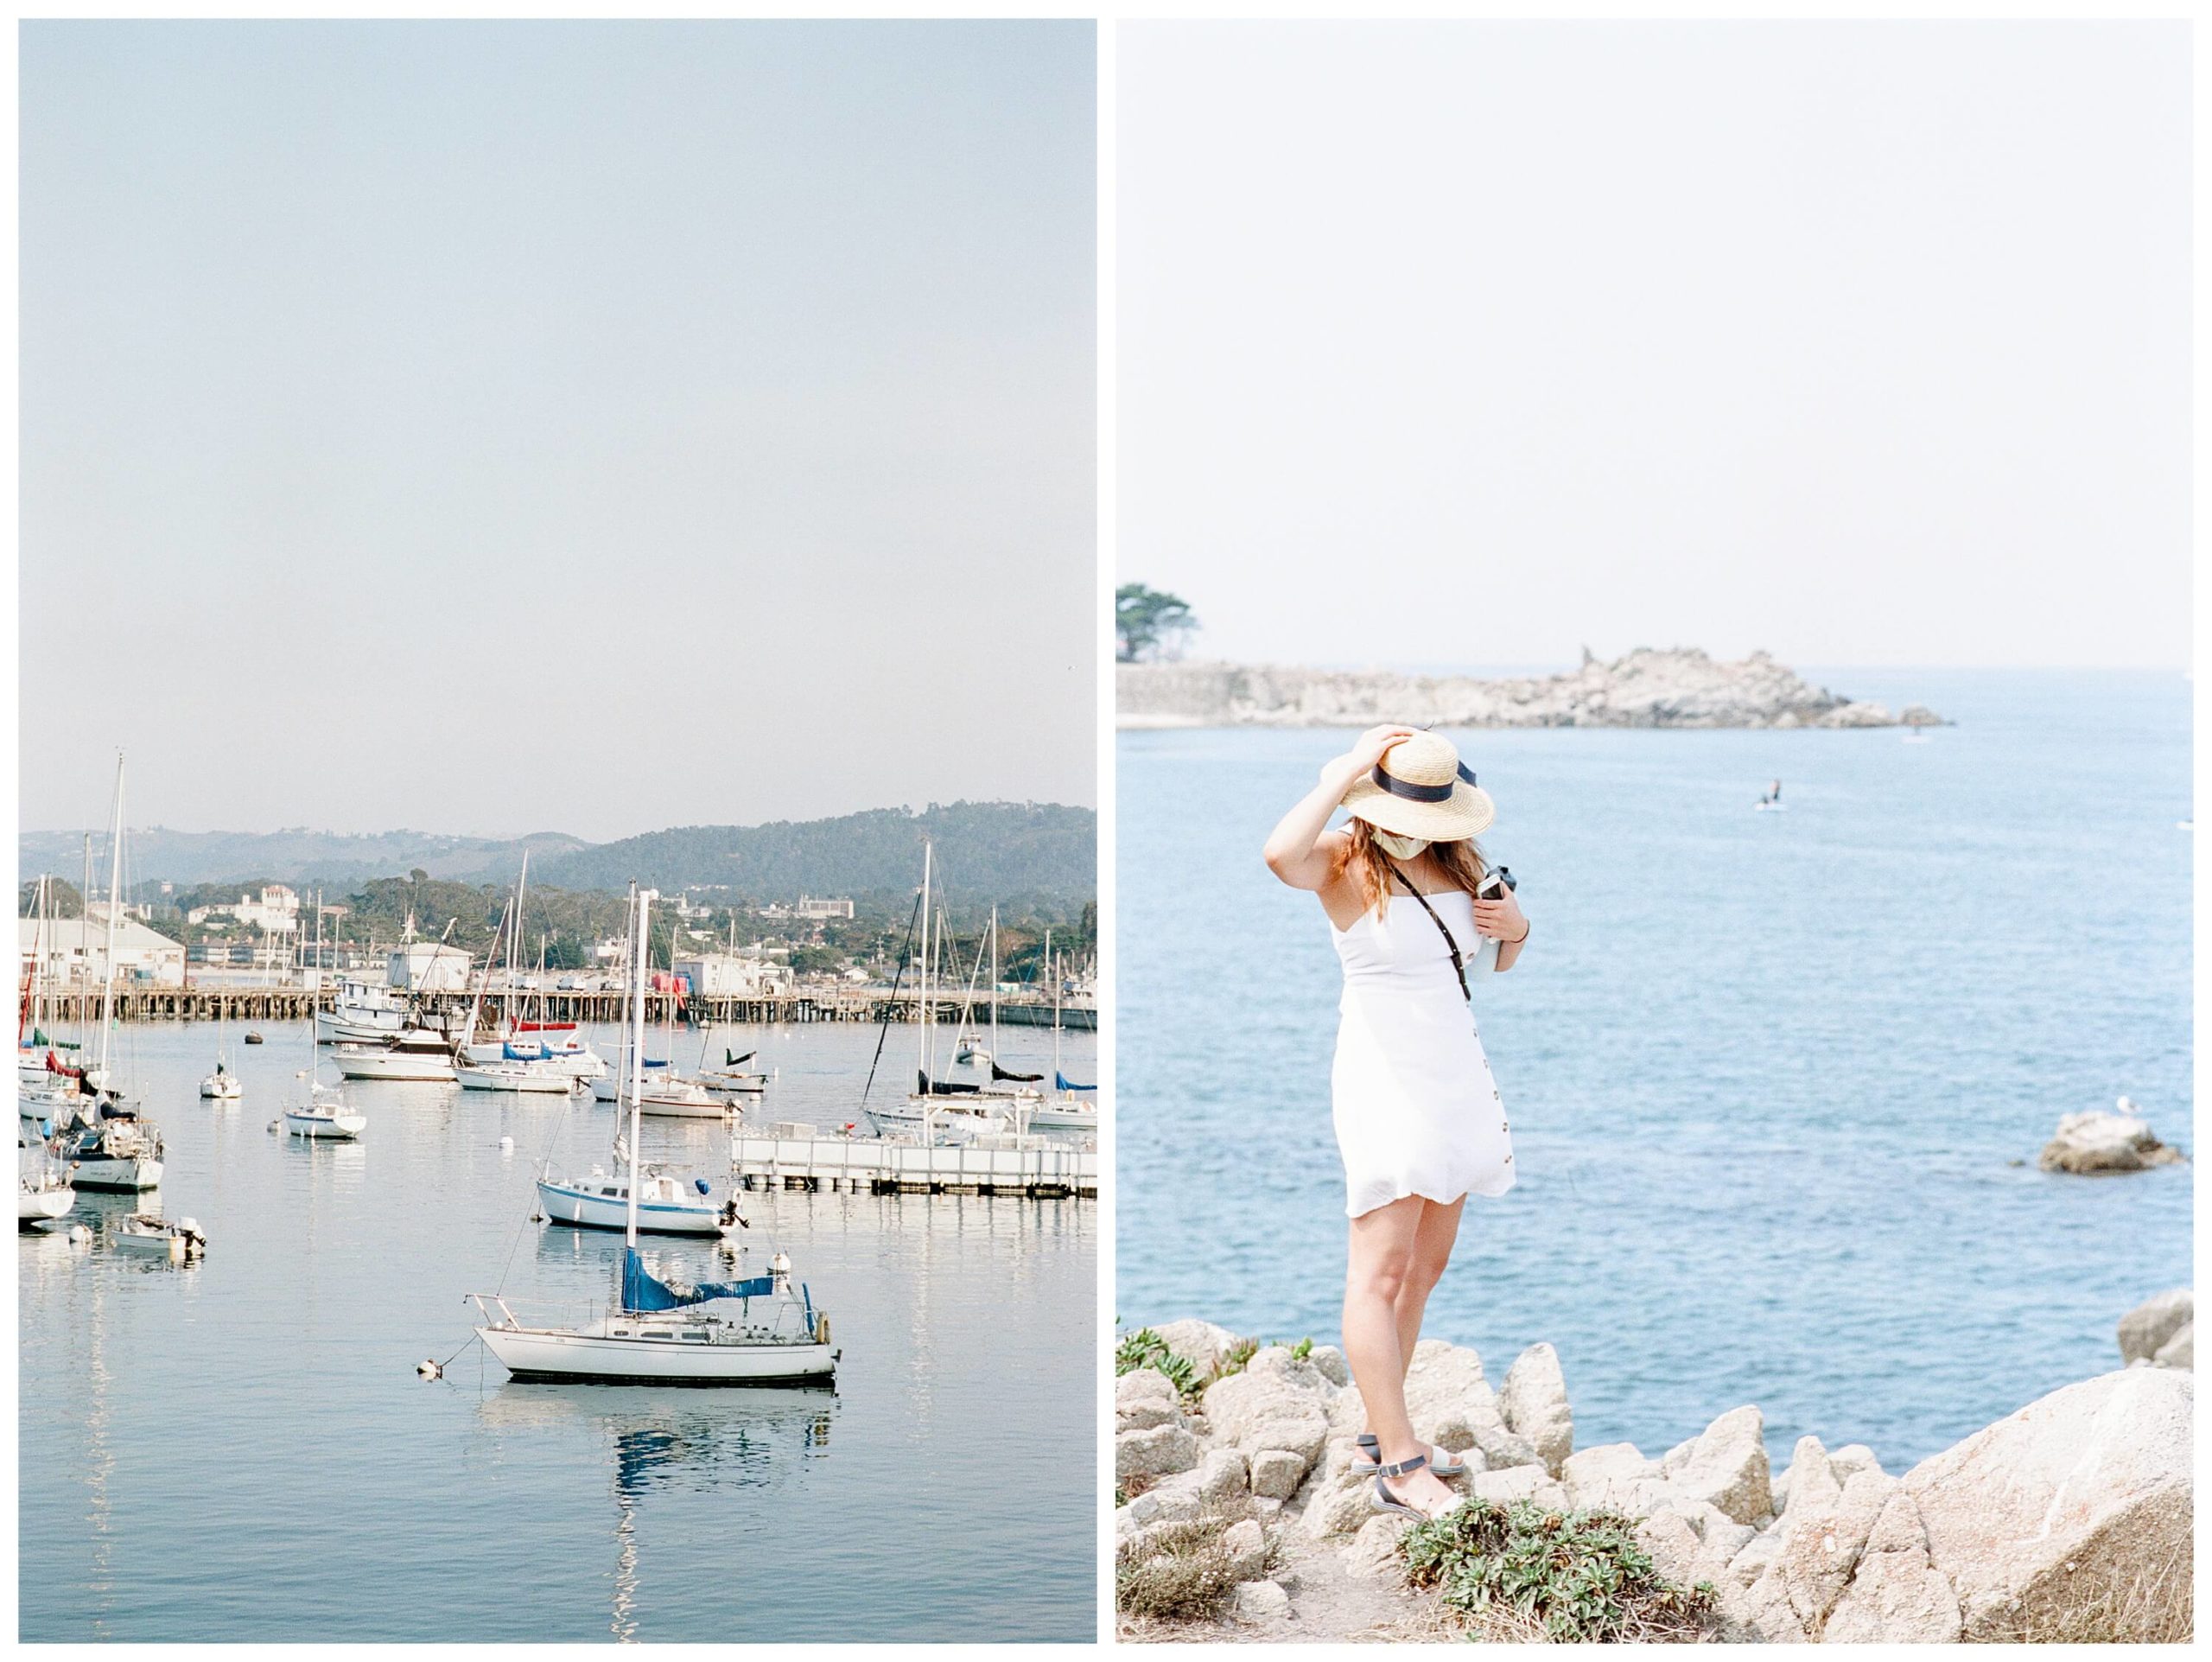 Left: Small sailboats dot the harbor on a sunny day in Monterey, California. Right: A girl in a white, knee-length sundress holds onto her wide-brimmed straw hat as she balances on the rock at Lovers Point, Monterey.